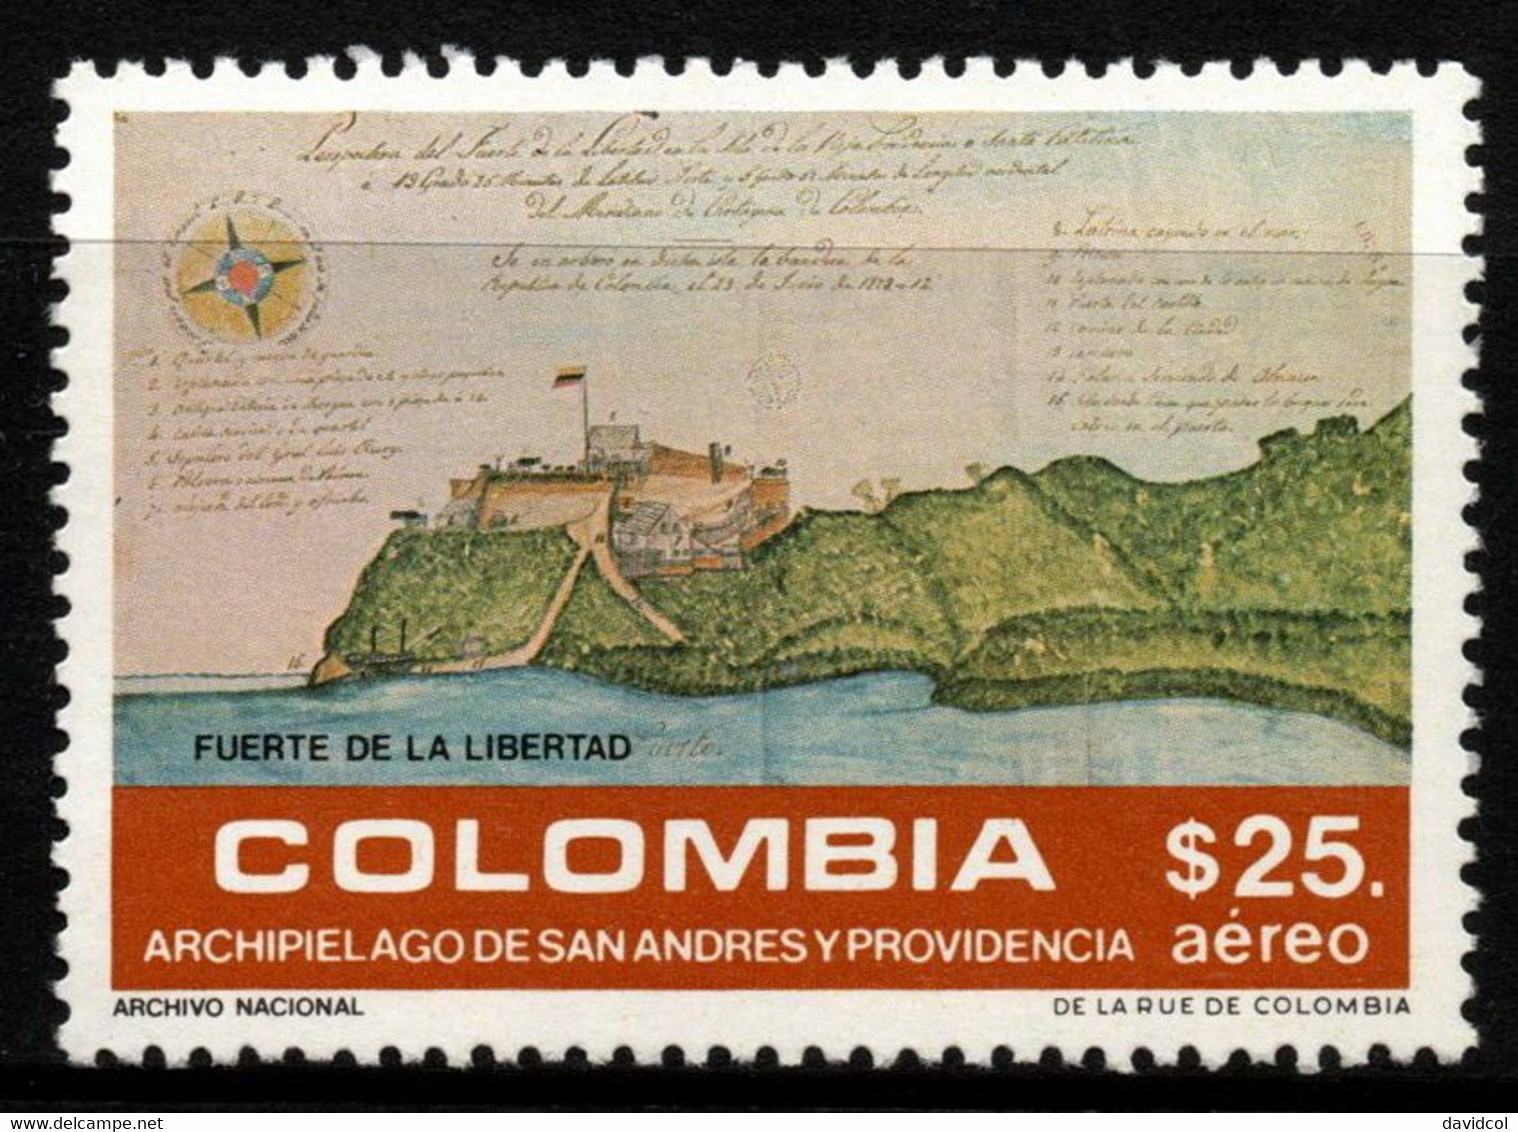 01- KOLUMBIEN - 1983- MI#:1608- MNH- SAN ANDRES AND PROVIDENCE ISLANDS - Colombia